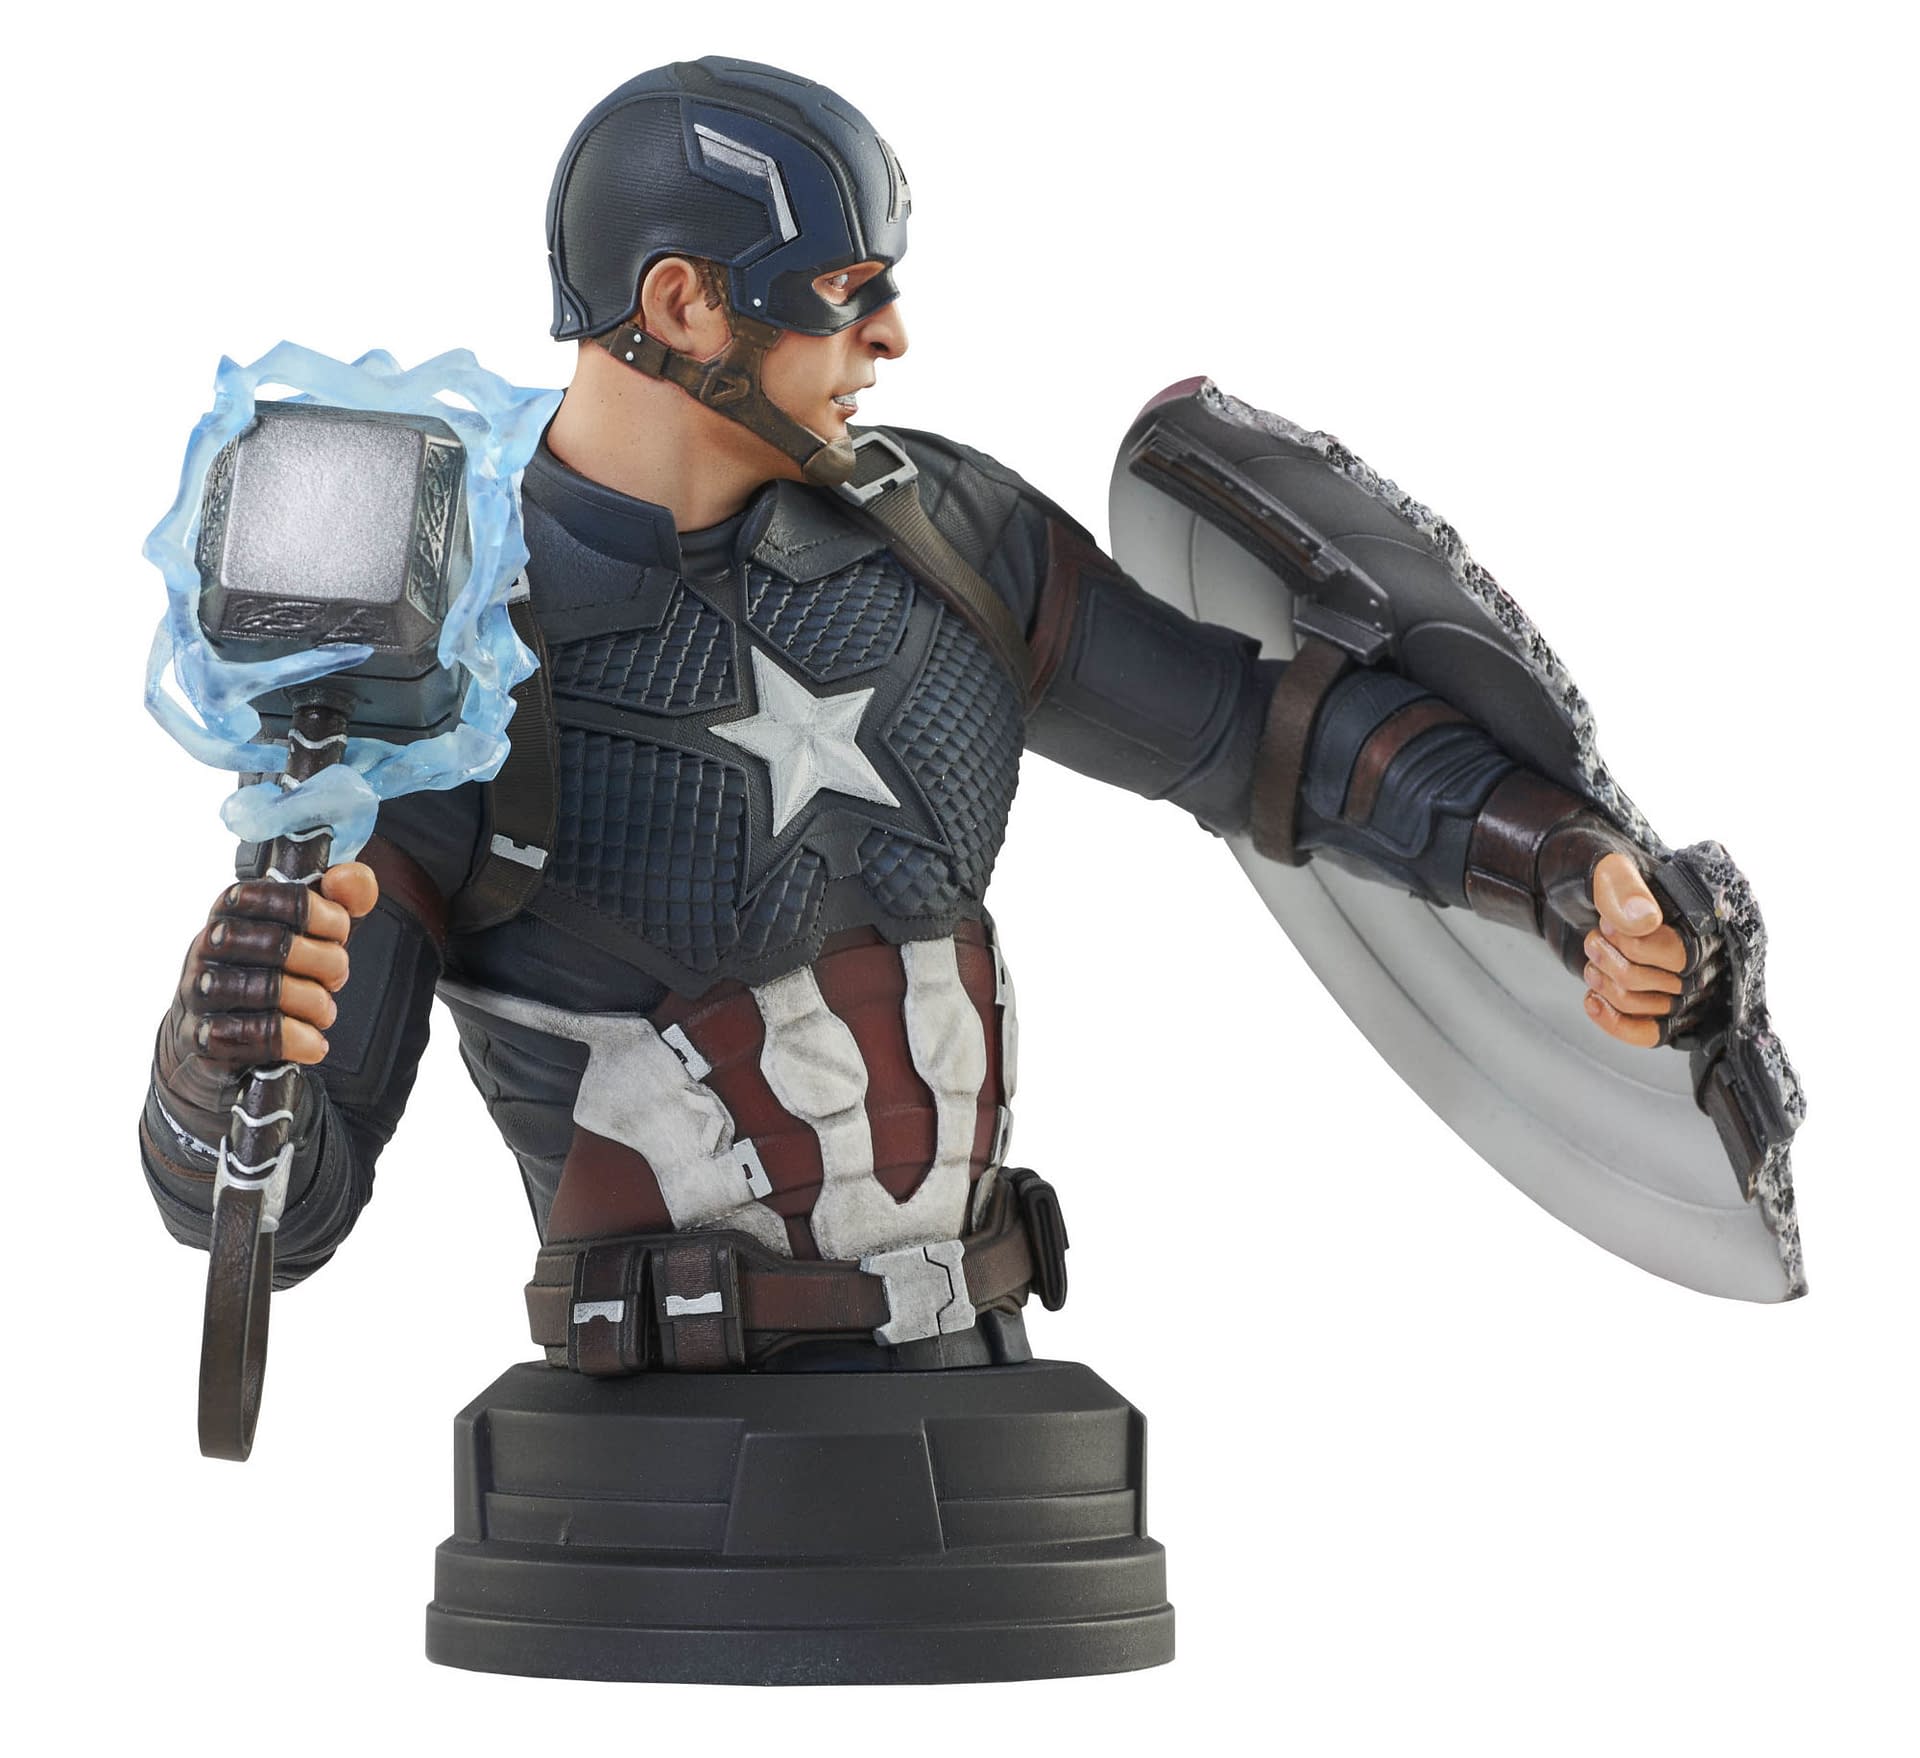 Marvel Studios' new sculptures coming soon from Diamond Select Toys 